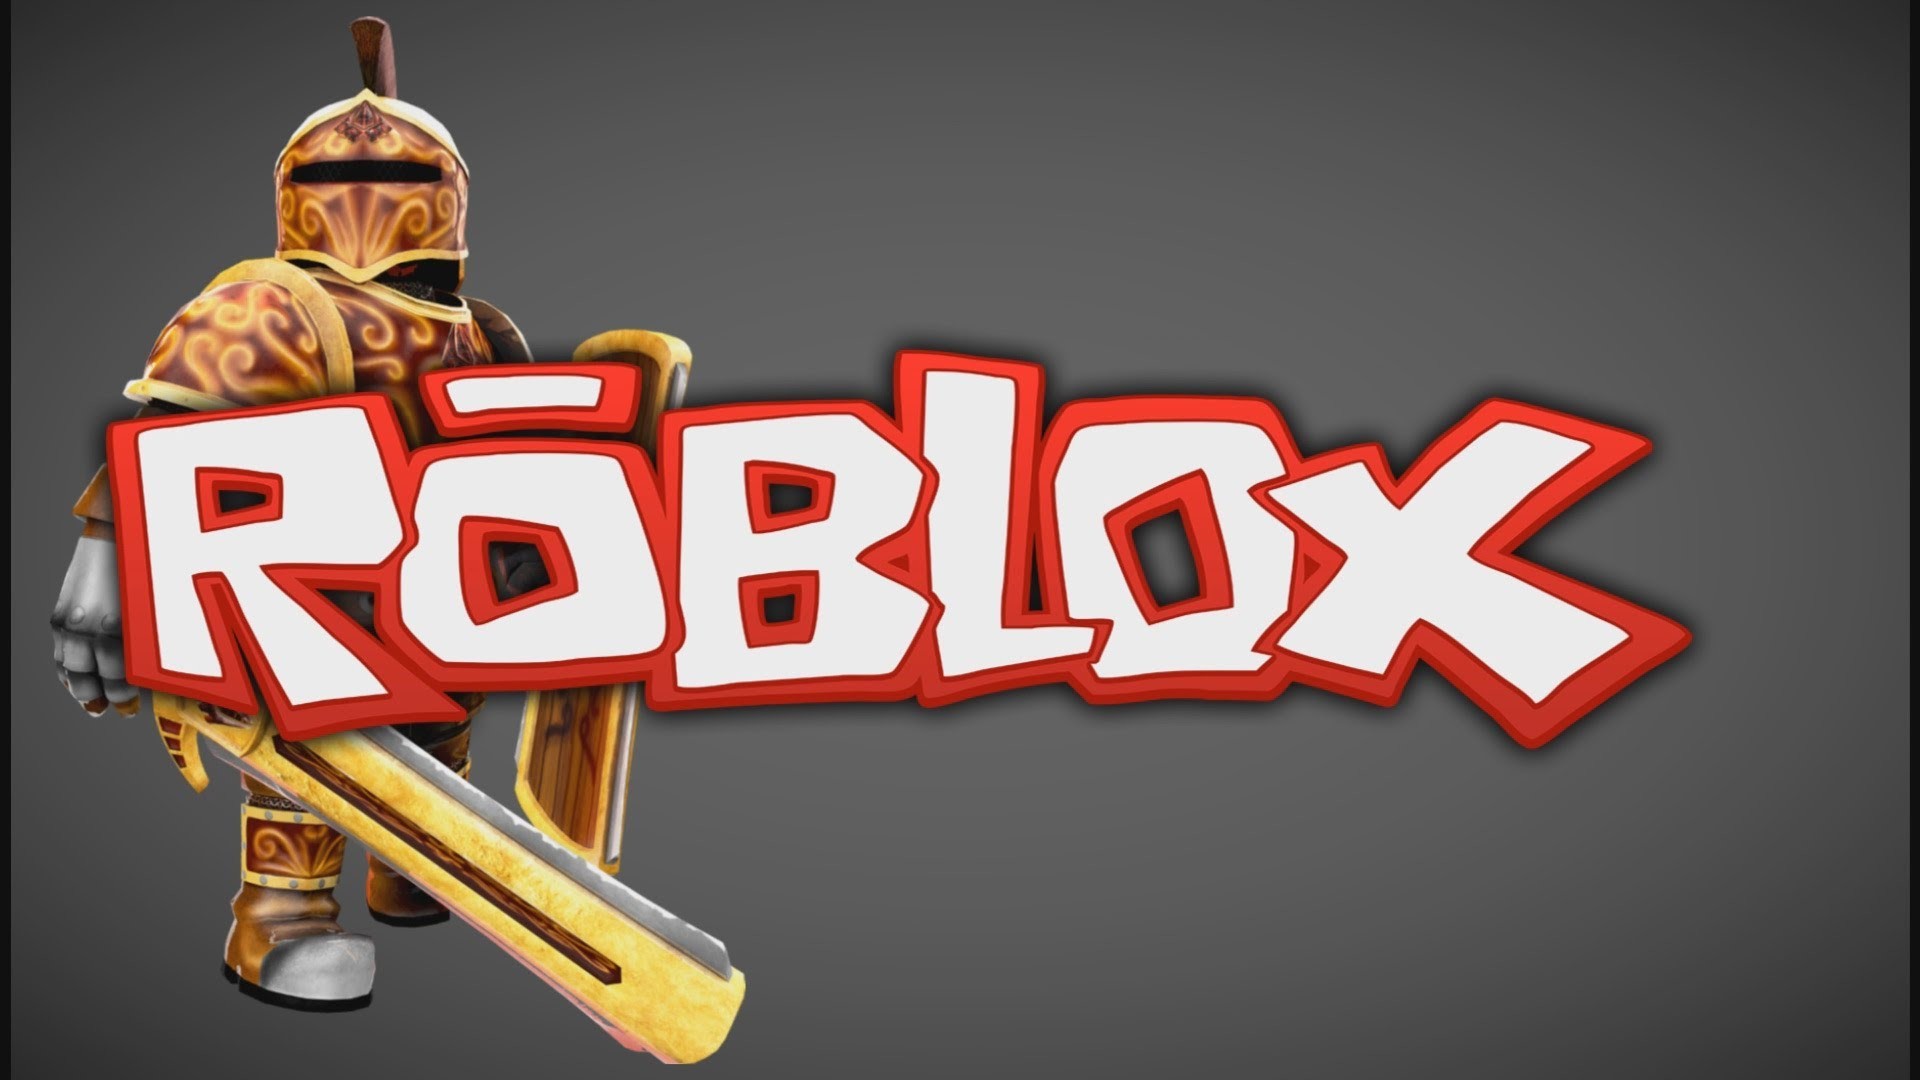 Roblox hd cool background